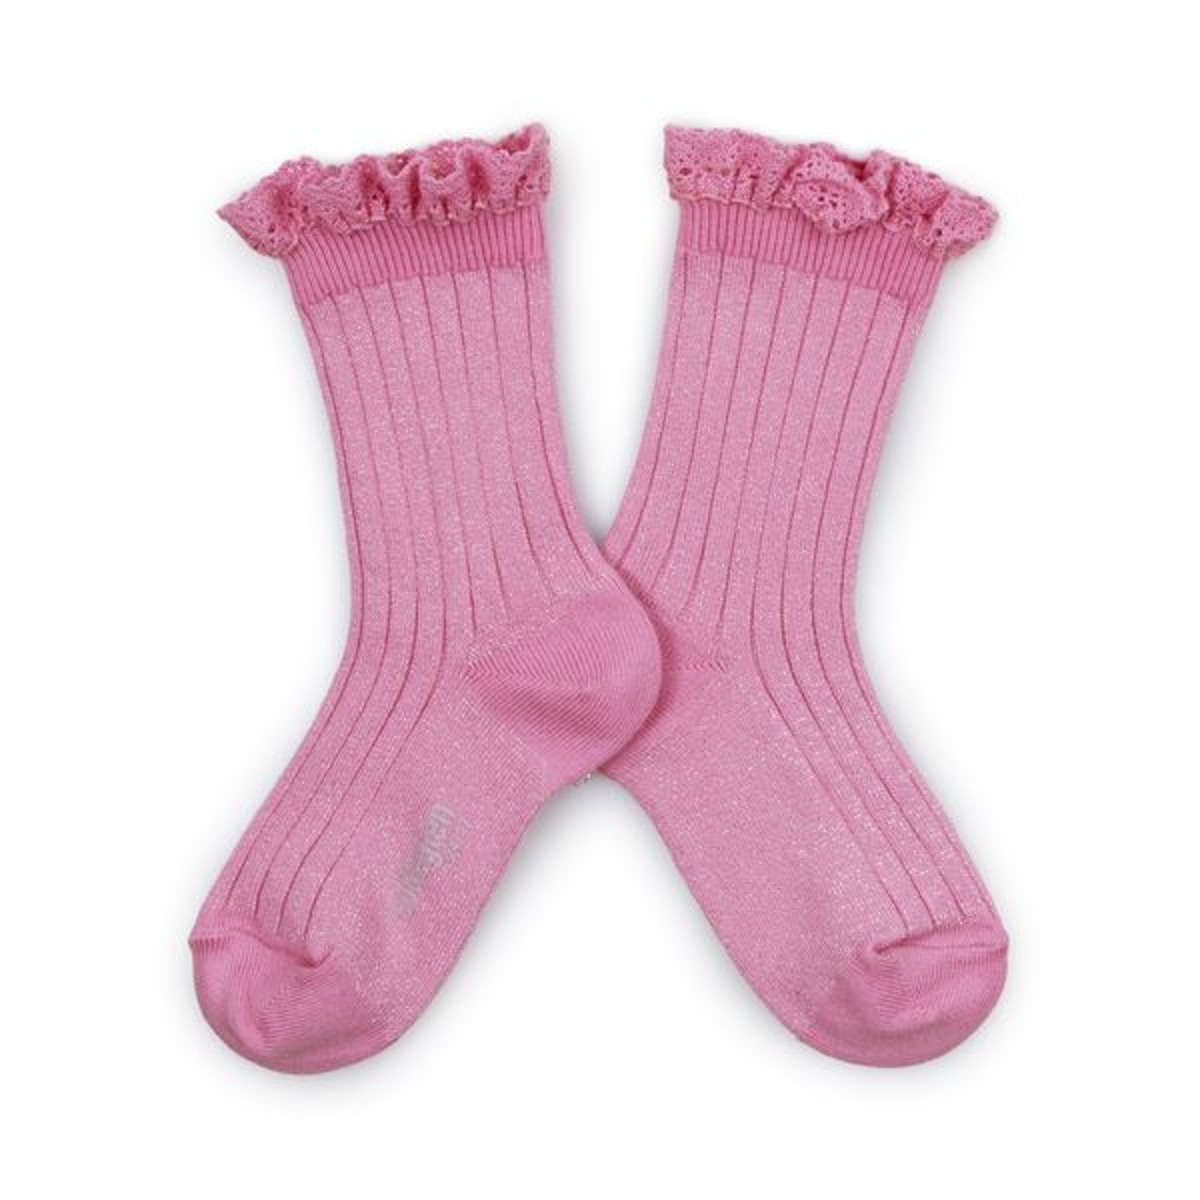 Victorine - Glitter Ribbed Crew Socks with Lace Trim - Candy pink #600